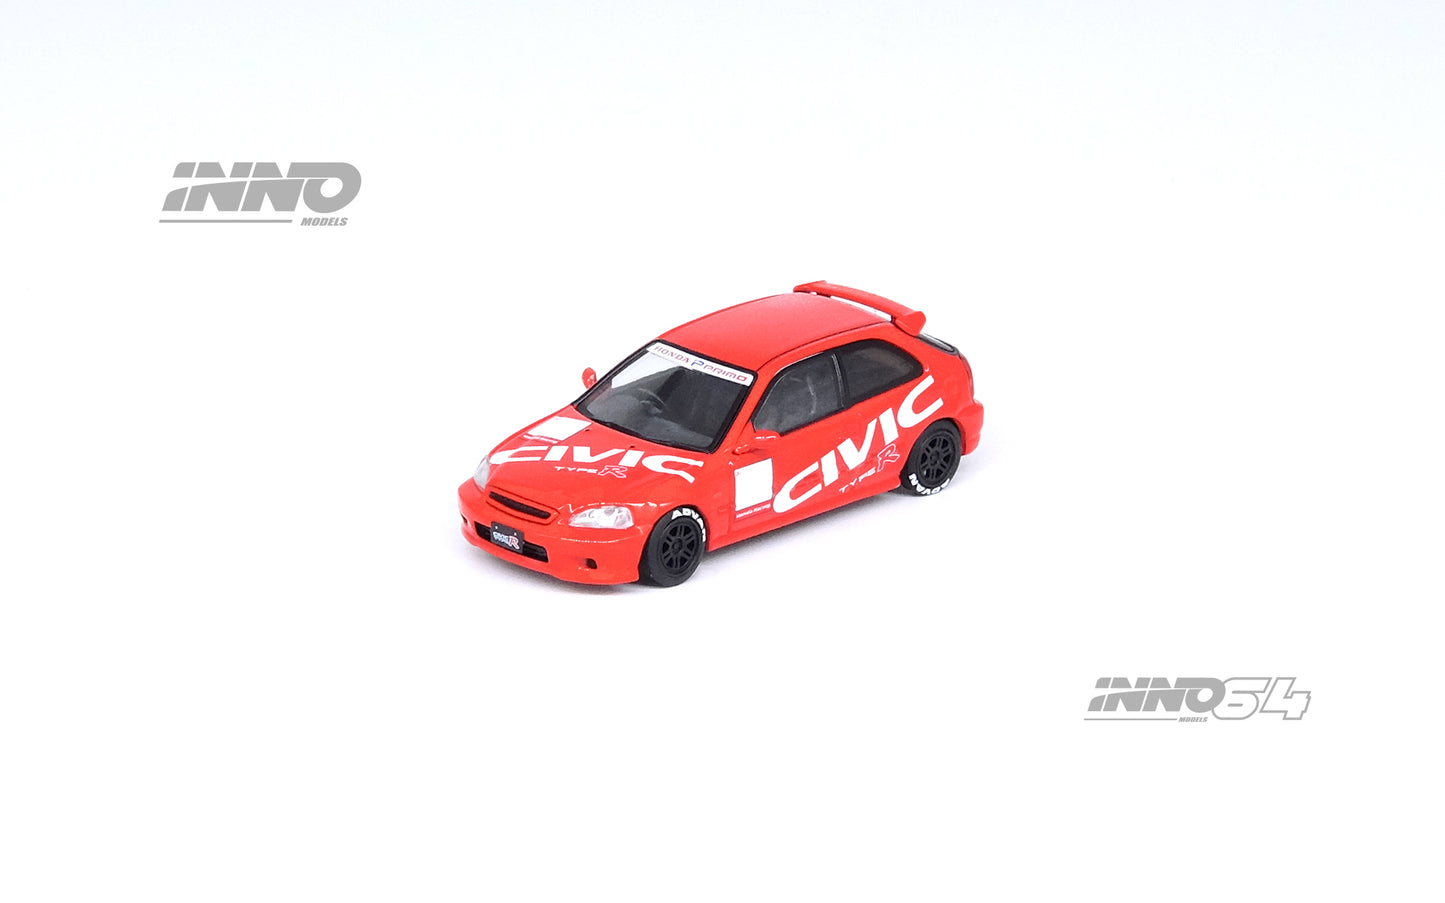 Inno64 1:64 HONDA CIVIC Type-R (EK9) Red With "CIVIC" Livery